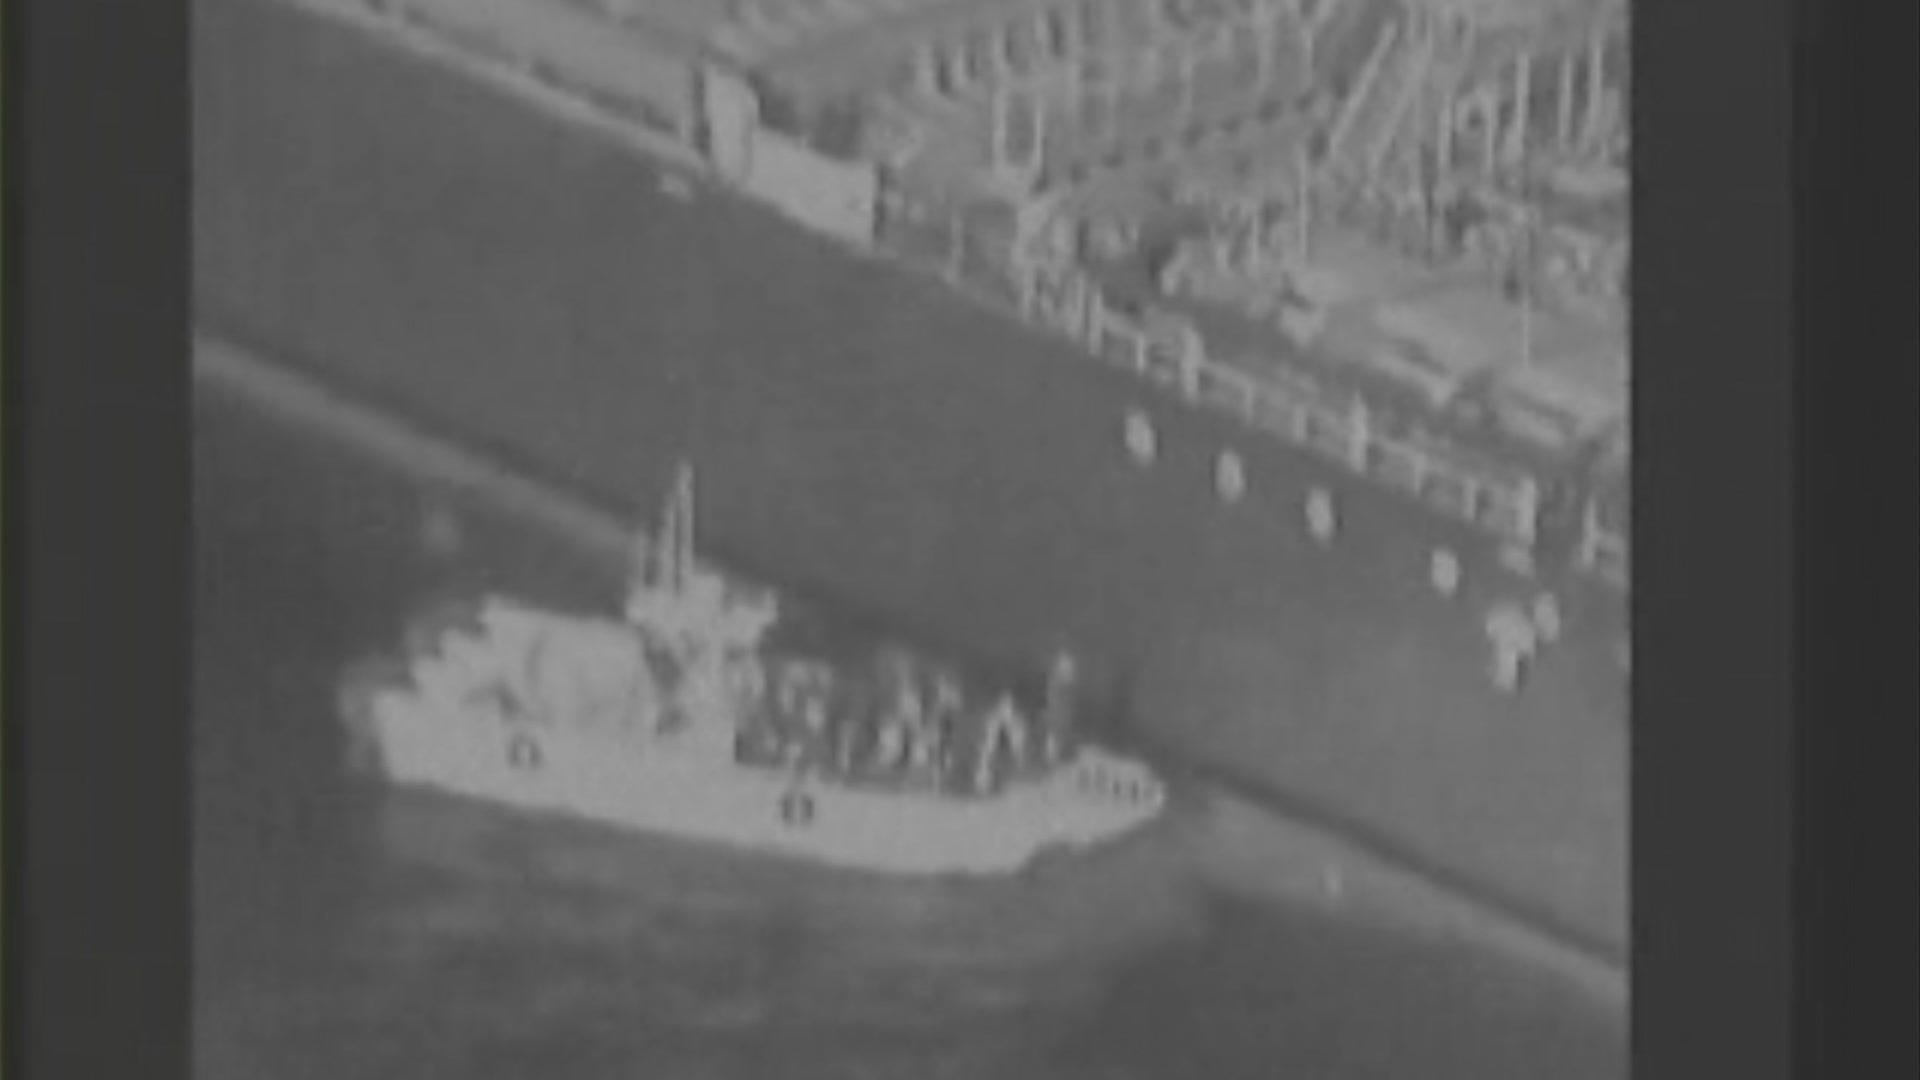 U.S. Military Says Video Proves Iran was Behind Tanker Attacks